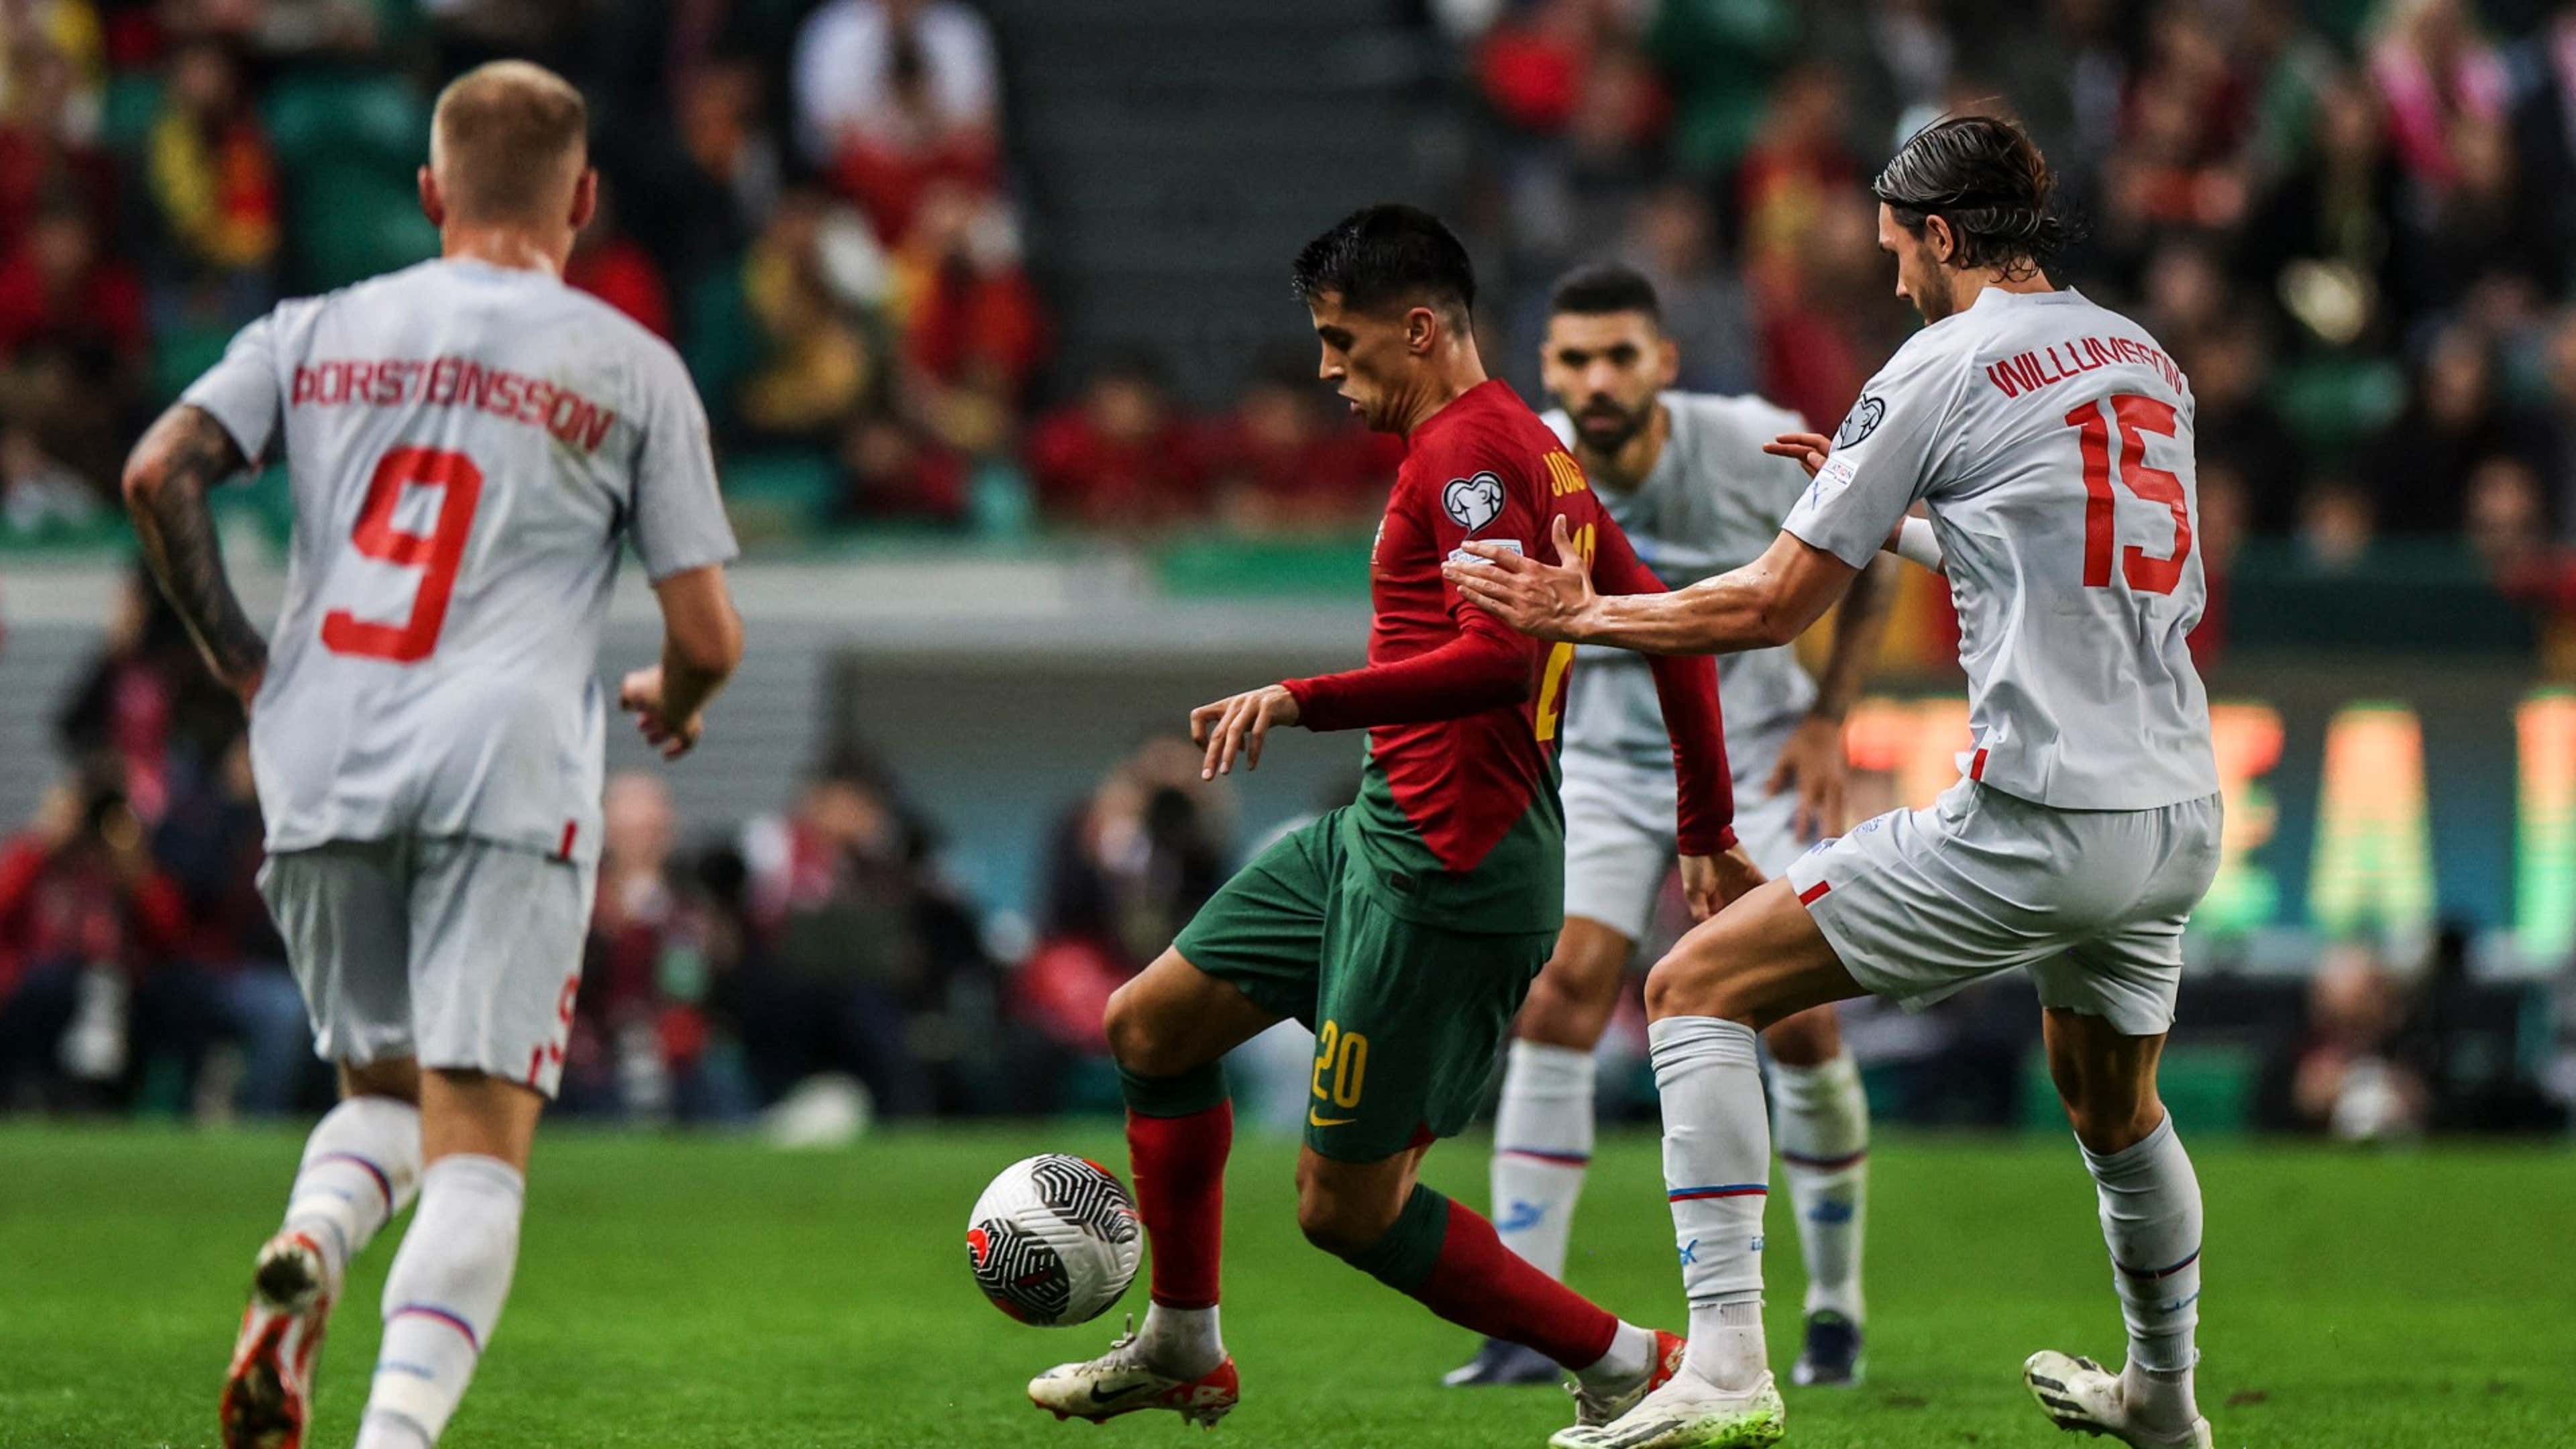 Joao Neves of Portugal in action during the UEFA EURO 2024 European News  Photo - Getty Images